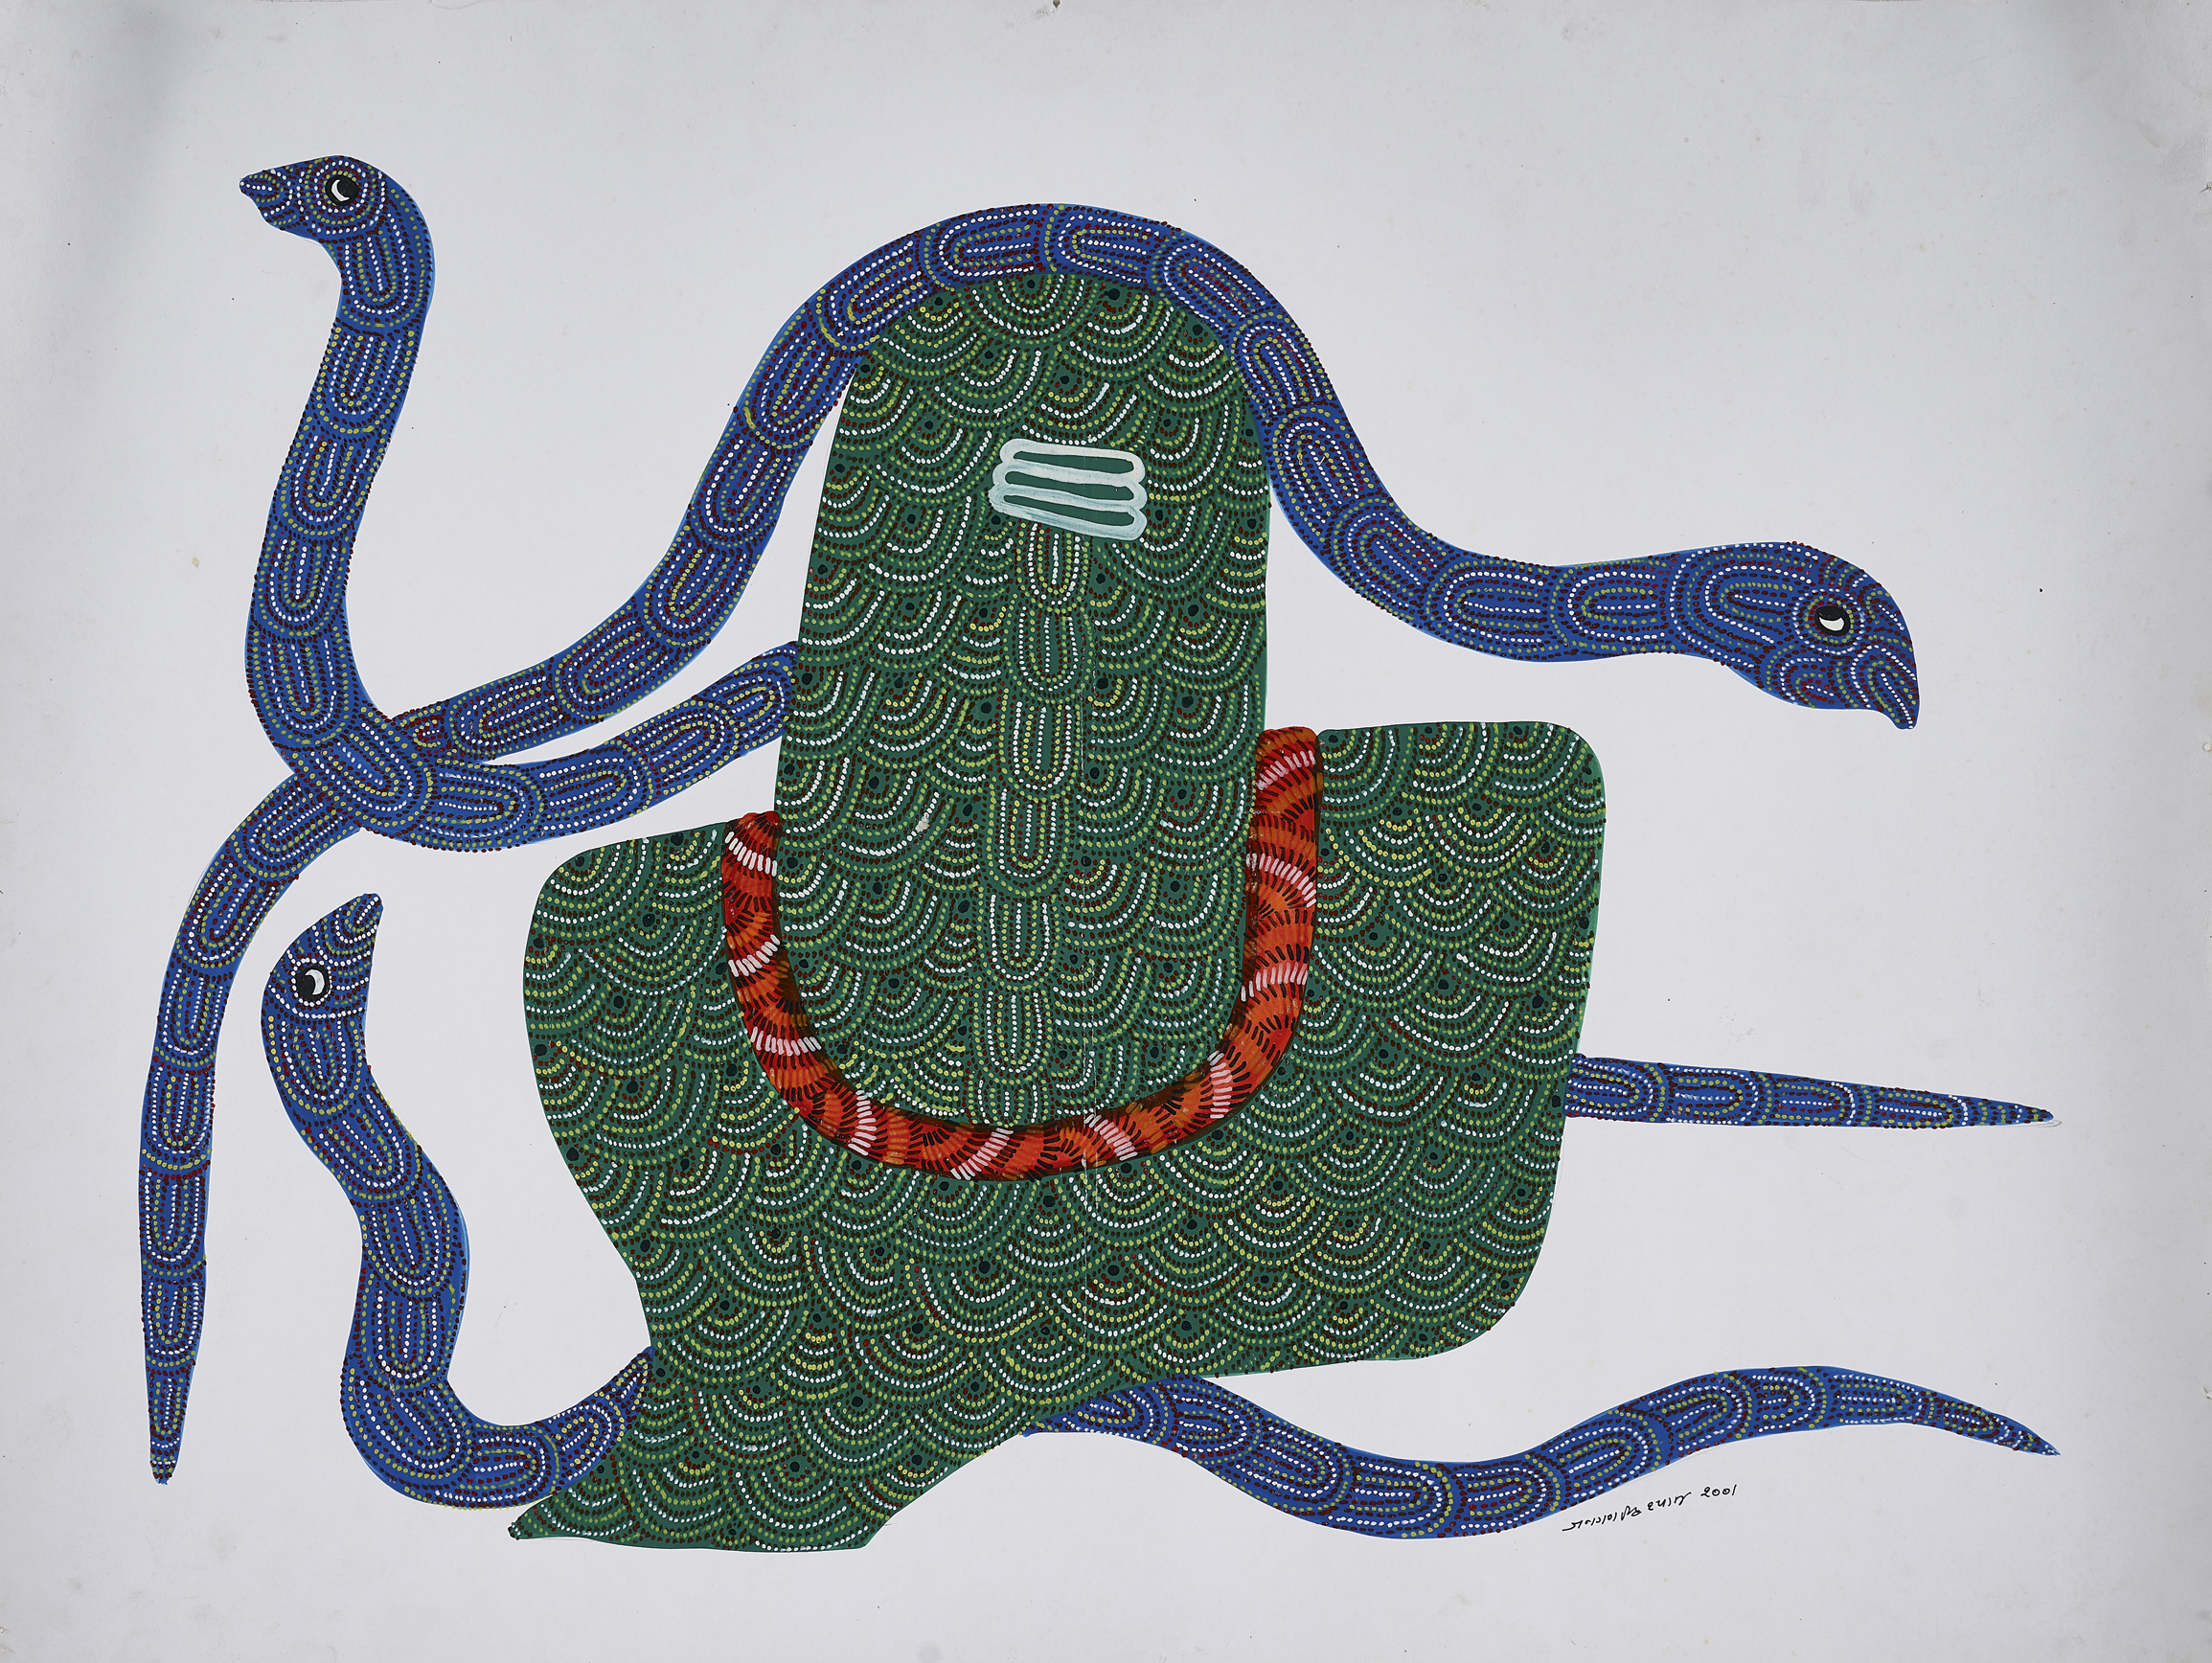 JANGARH SINGH SHYAM, Untitled (Lingam and snake), Acrylic on paper, 2001, 21 7/8 x 27 7/8 in.